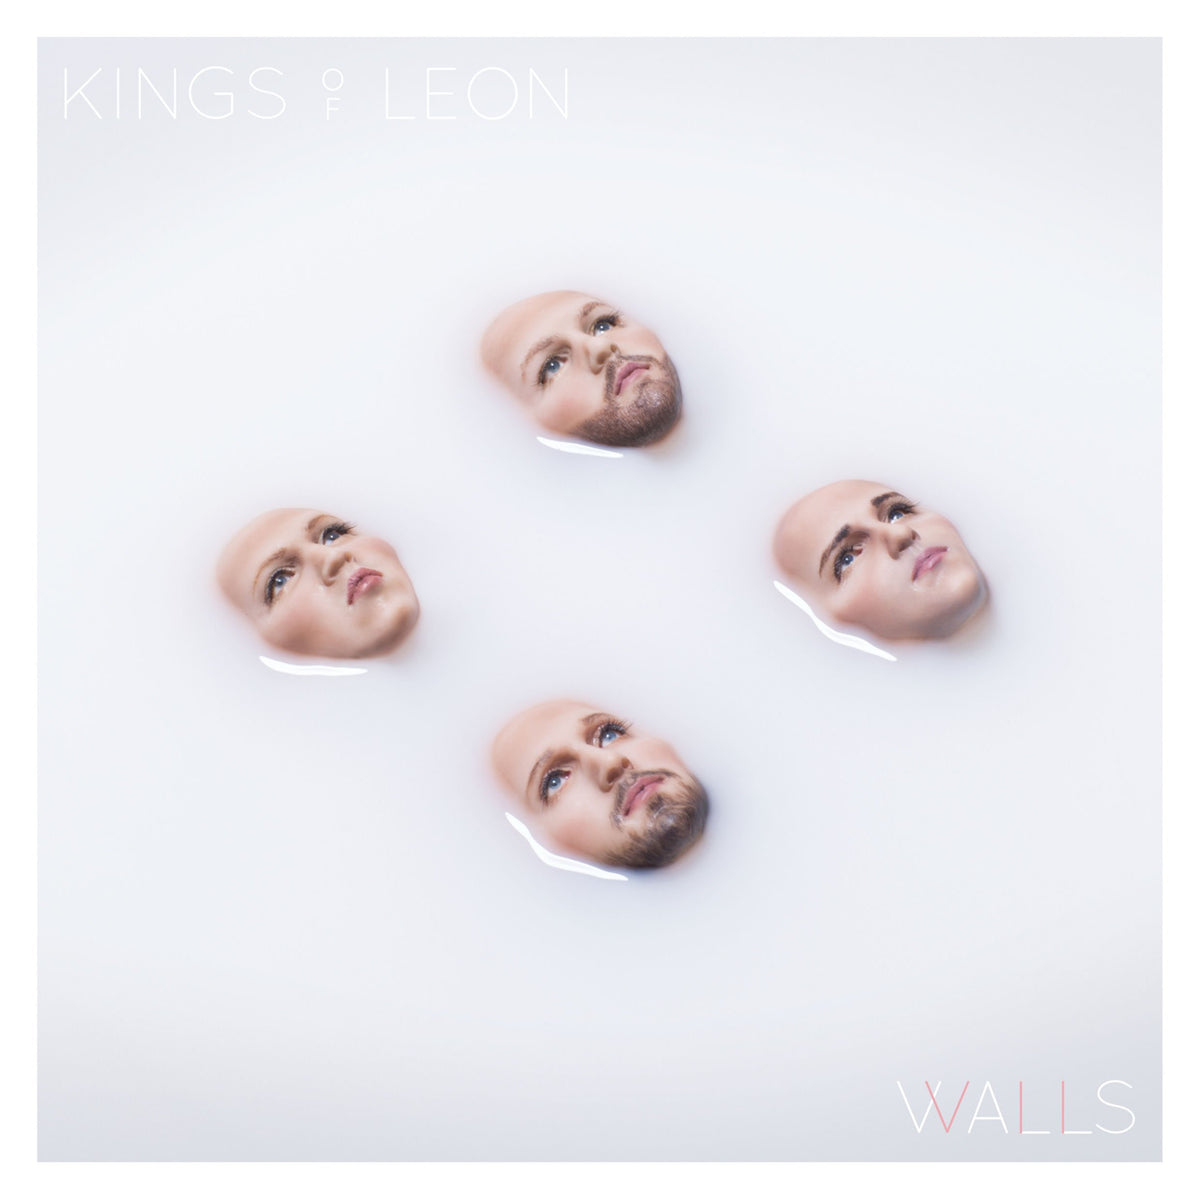 Coming to Terms With Kings of Leon, And Their New Album, WALLS